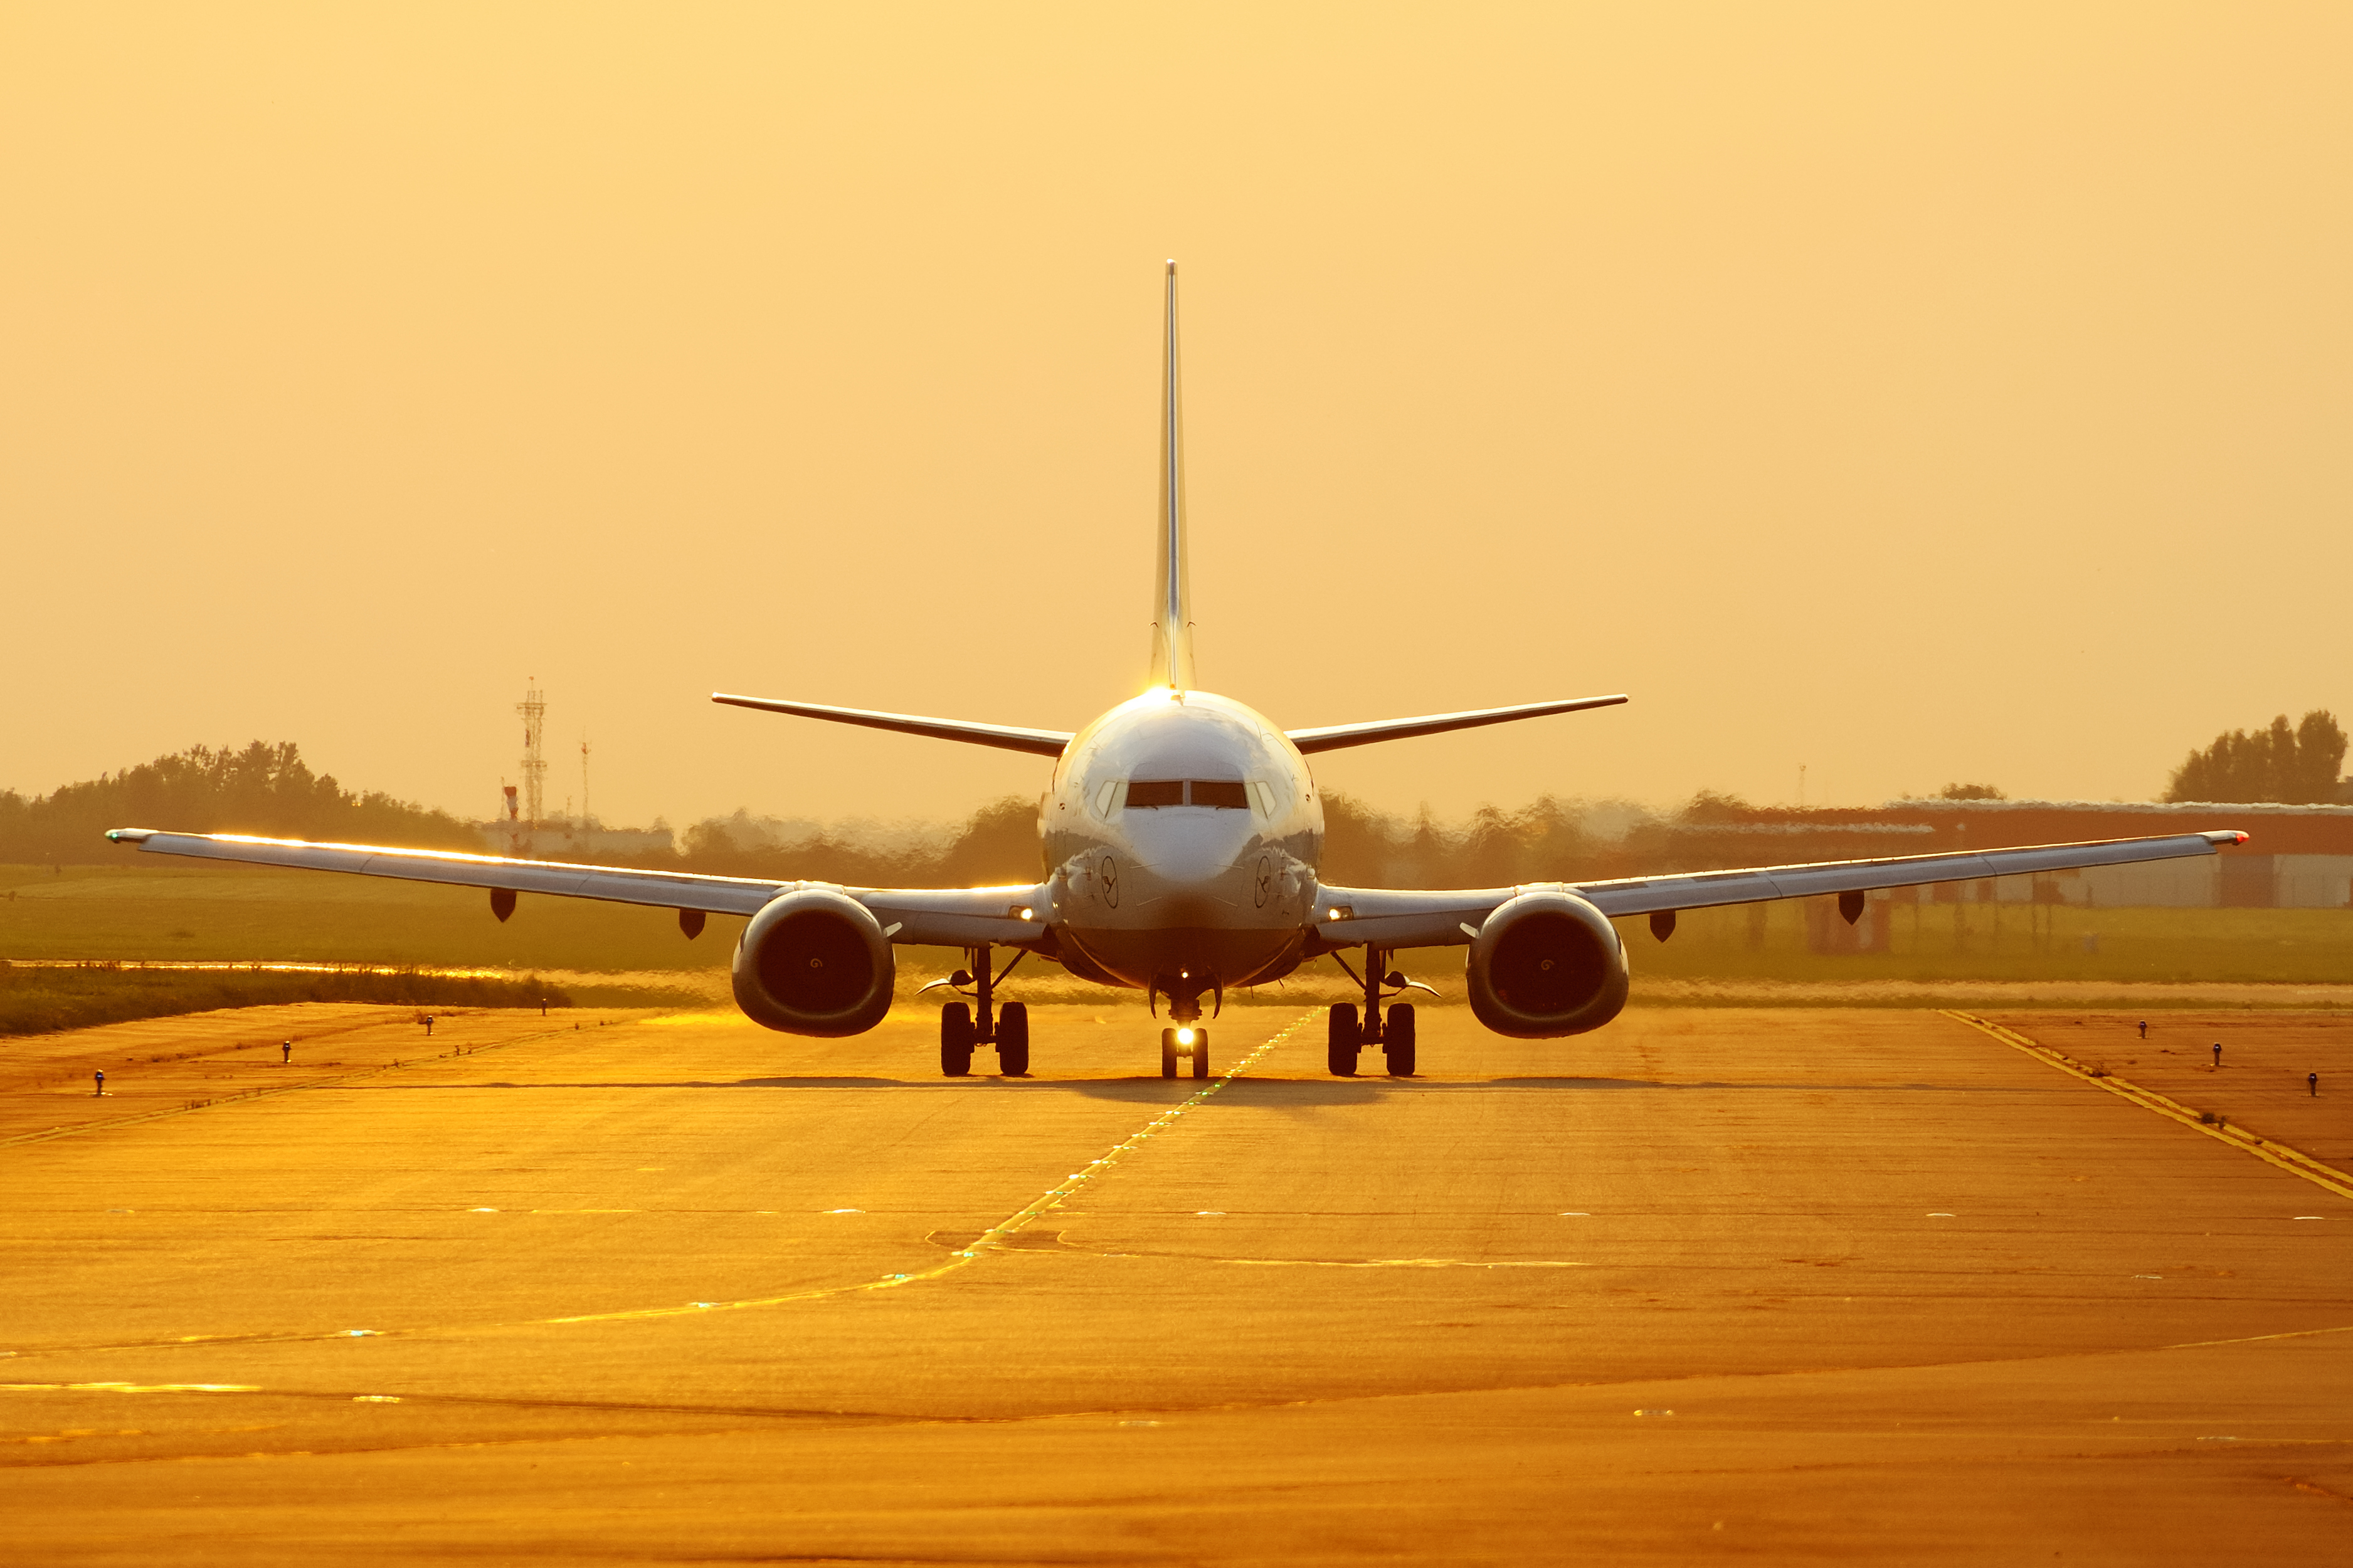 Boeing Aircraft On The Runway Wallpaper And Image